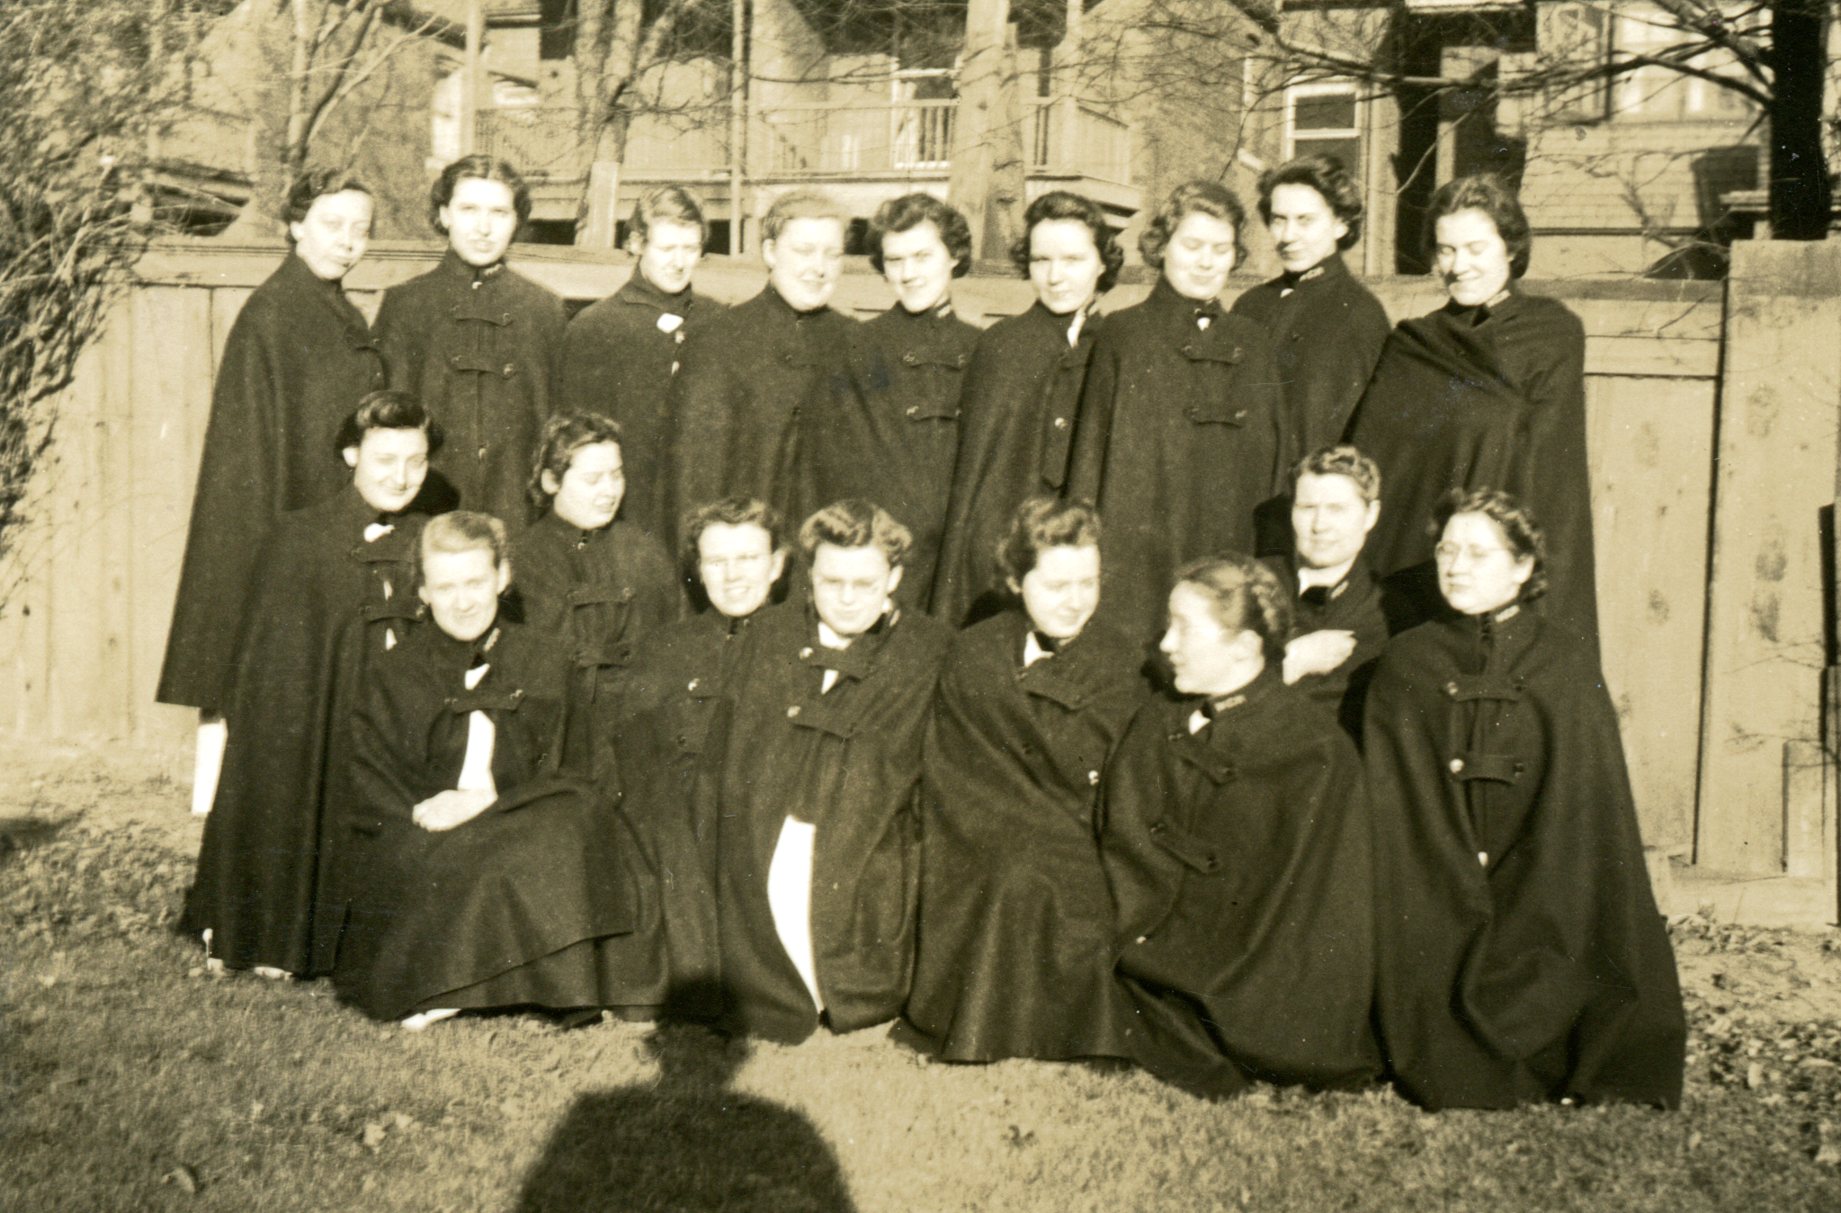 Eighteen young women pose for a portrait. They are wearing closed nurses' capes, and are outside before a fence. The photographer's shadow can be seen on the ground.